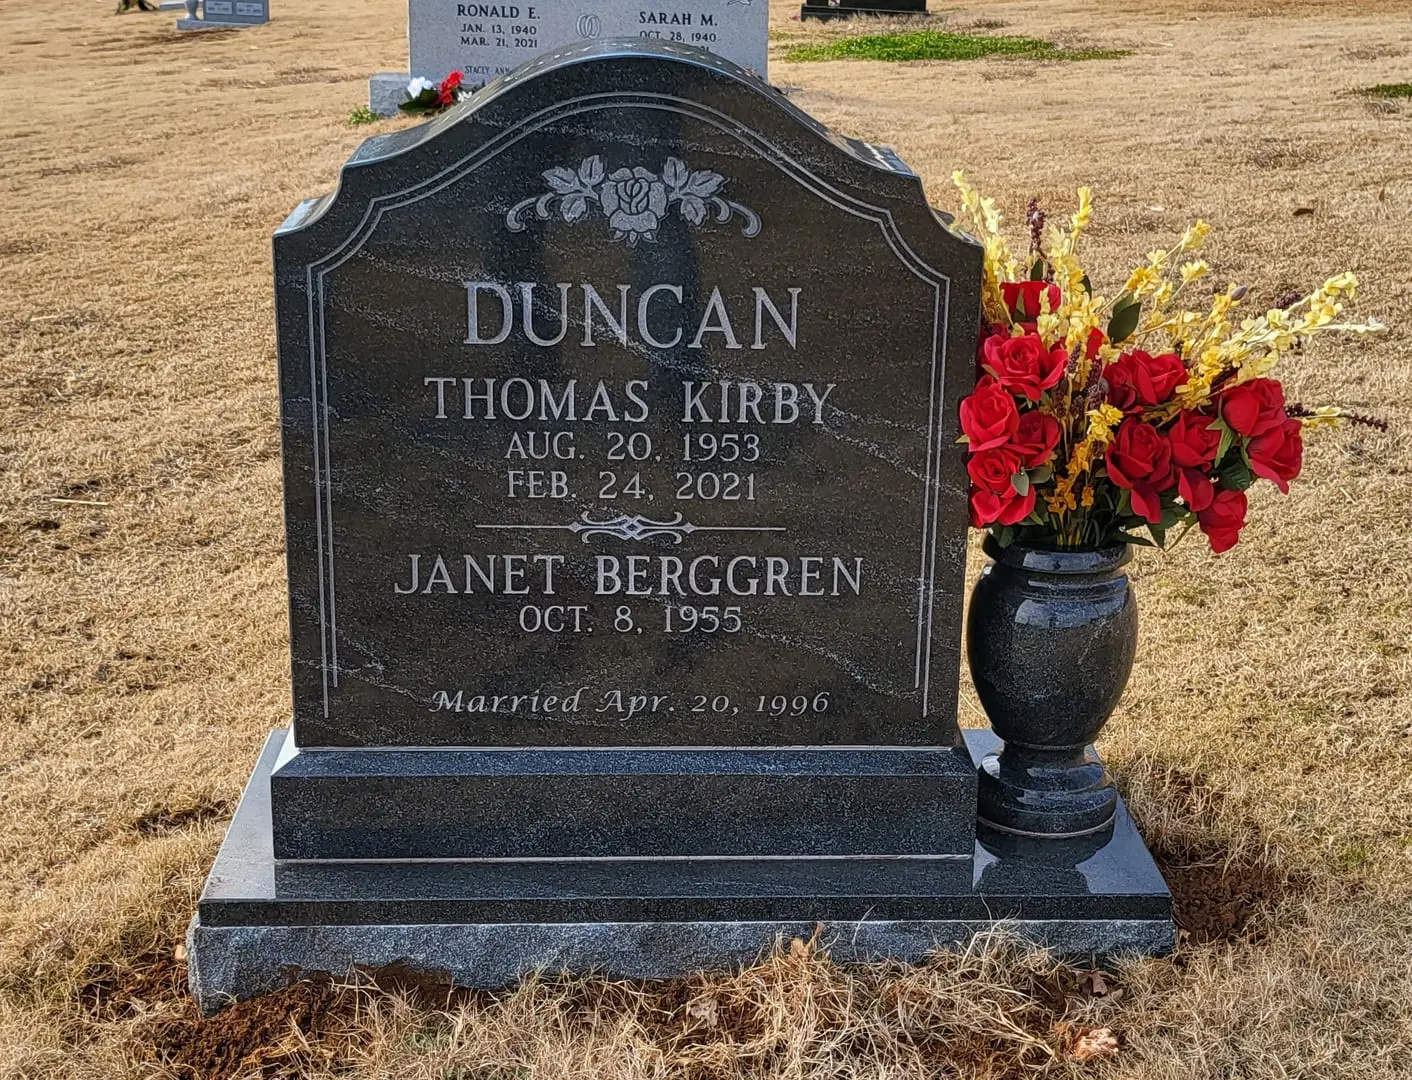 A memorial slab for Duncan Thomas Kirby and Janet Berggren